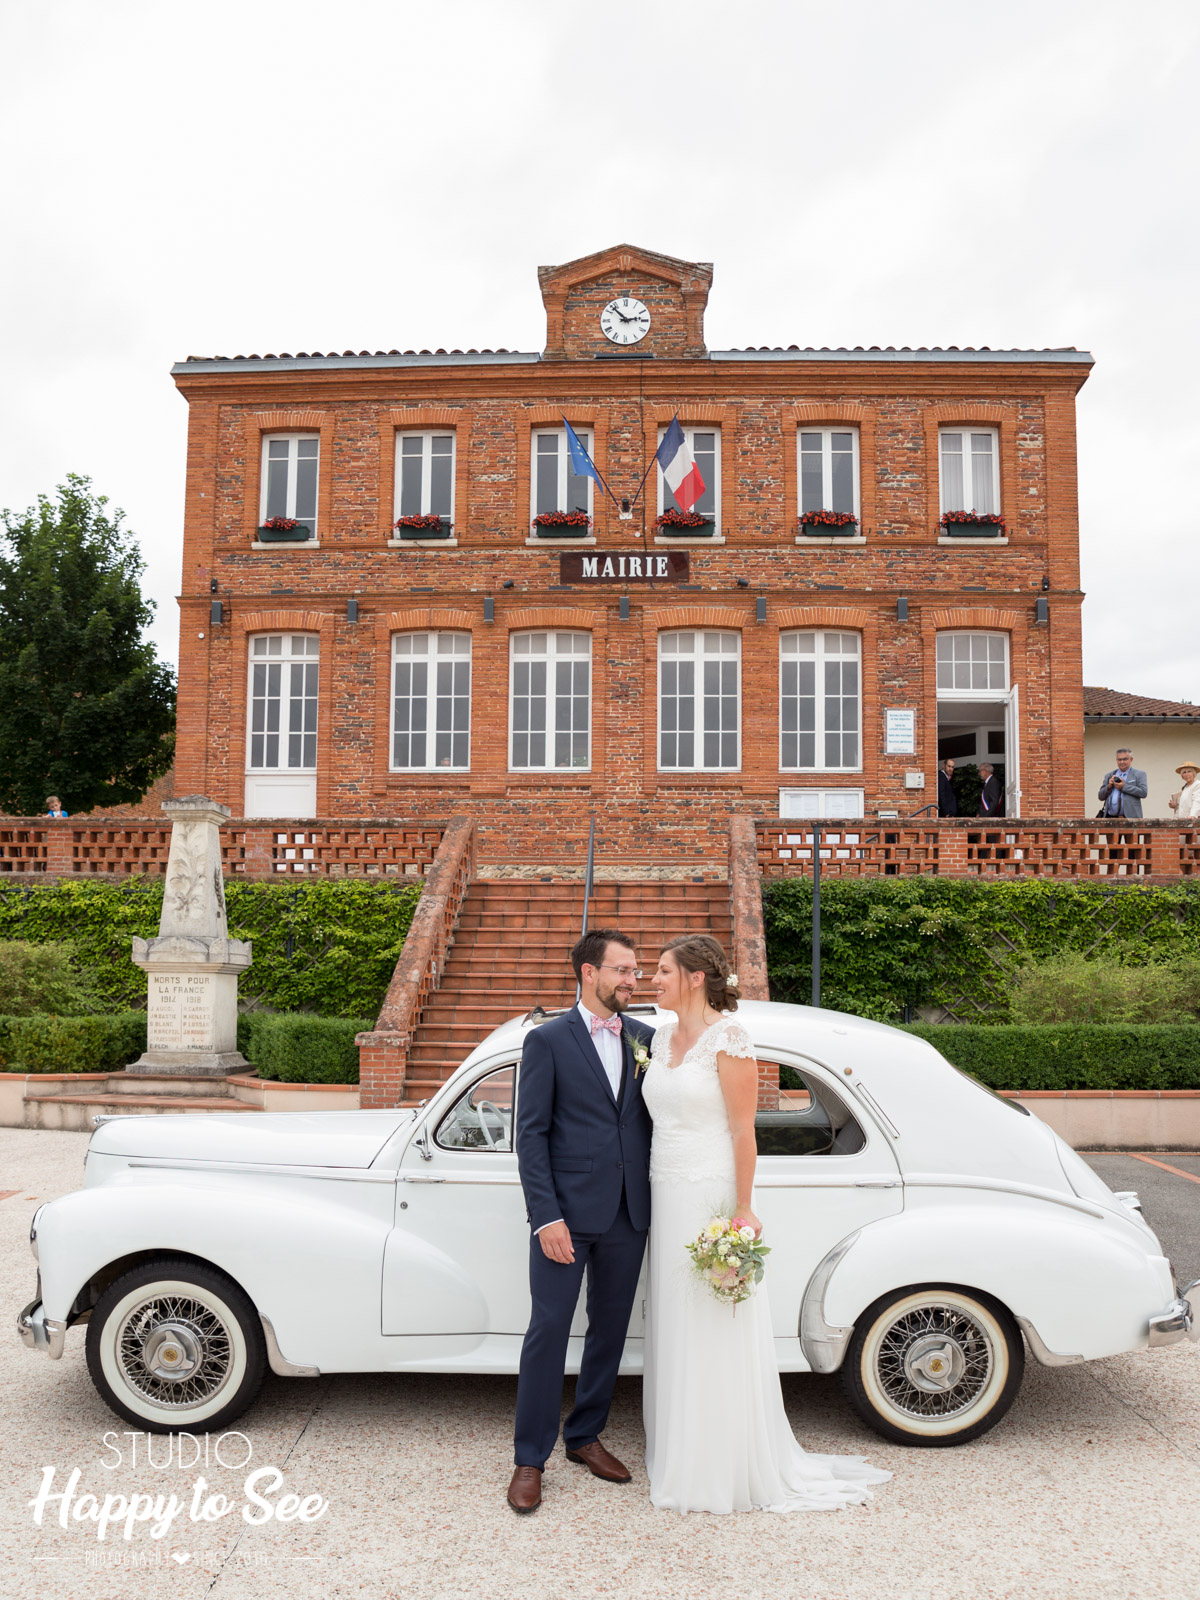 Mariage champetre Toulouse